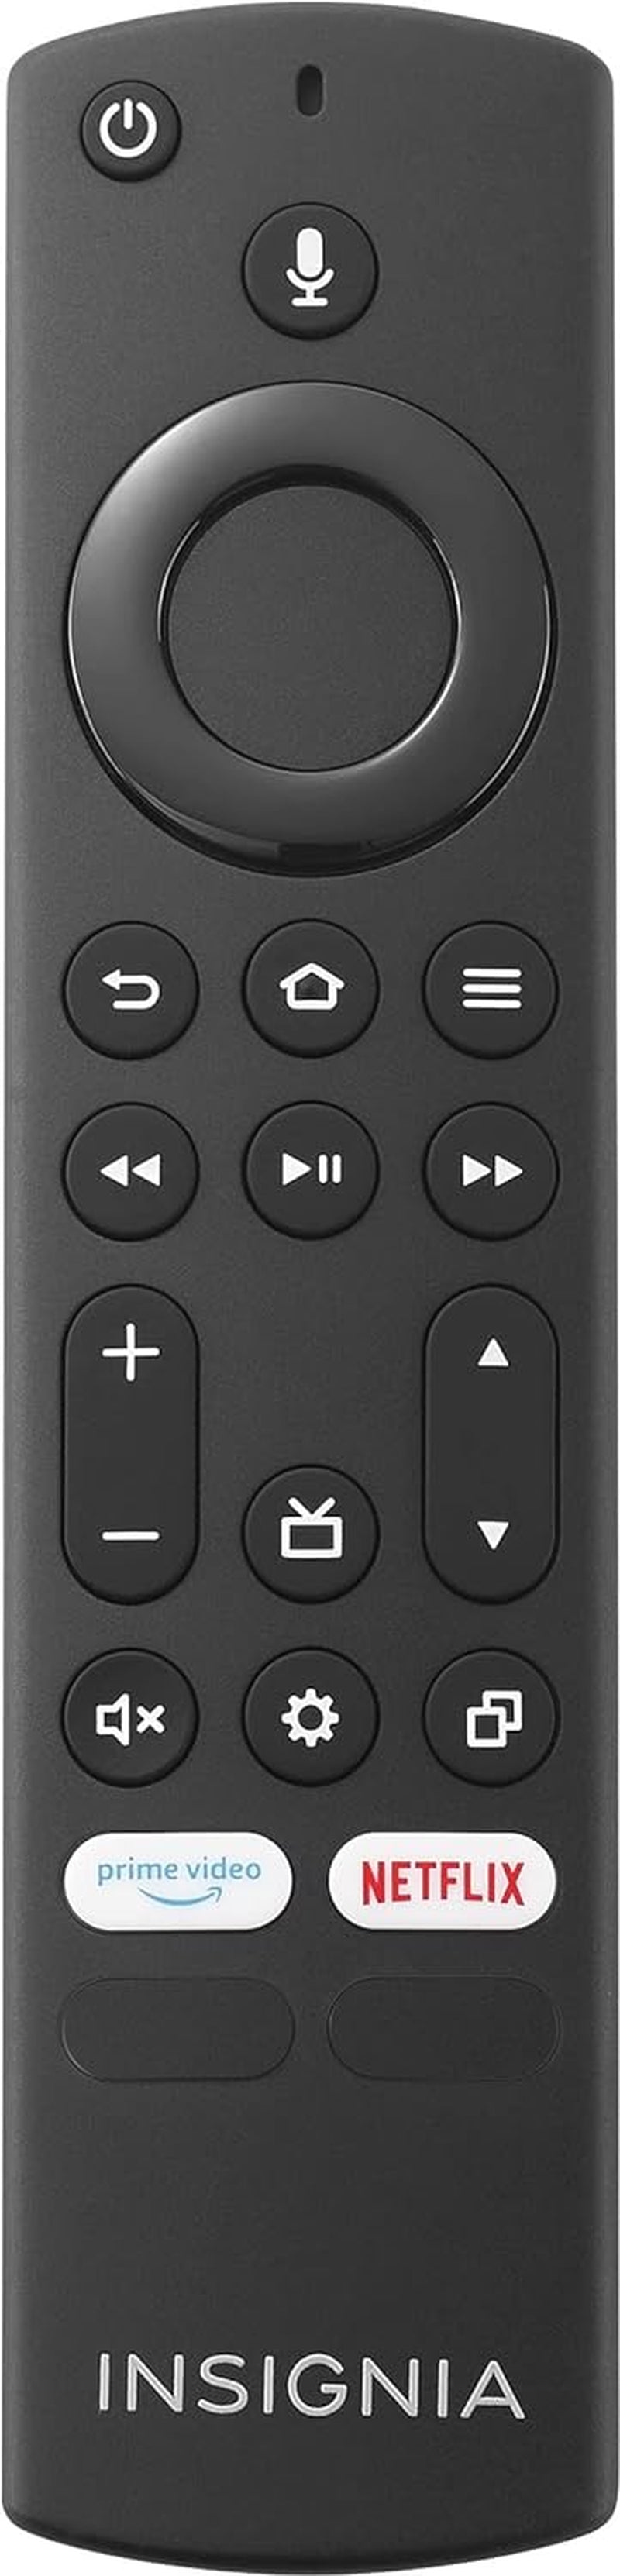 42-Inch Class F20 Series Smart Full HD 1080P Fire TV with Alexa Voice Remote (NS-42F201NA23, 2022 Model)